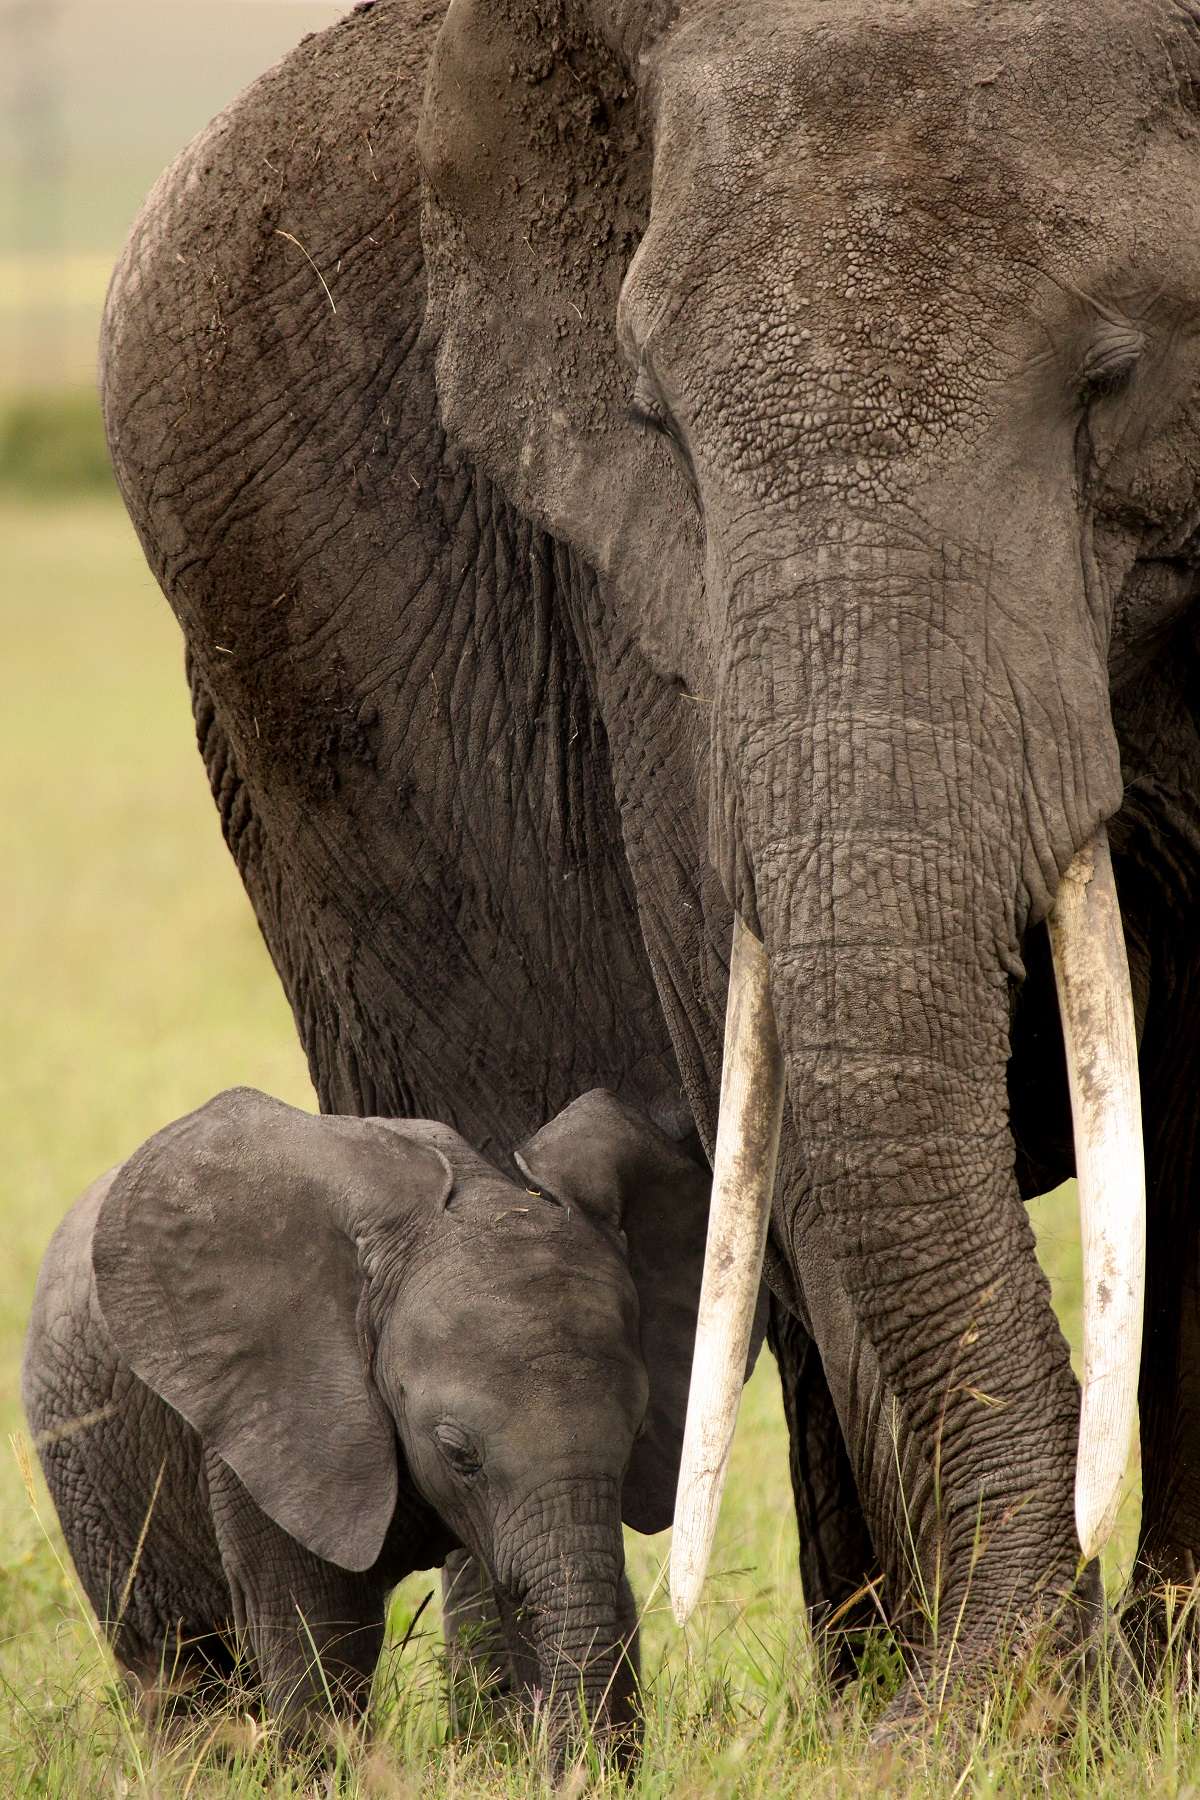 Elephant with baby in Africa.